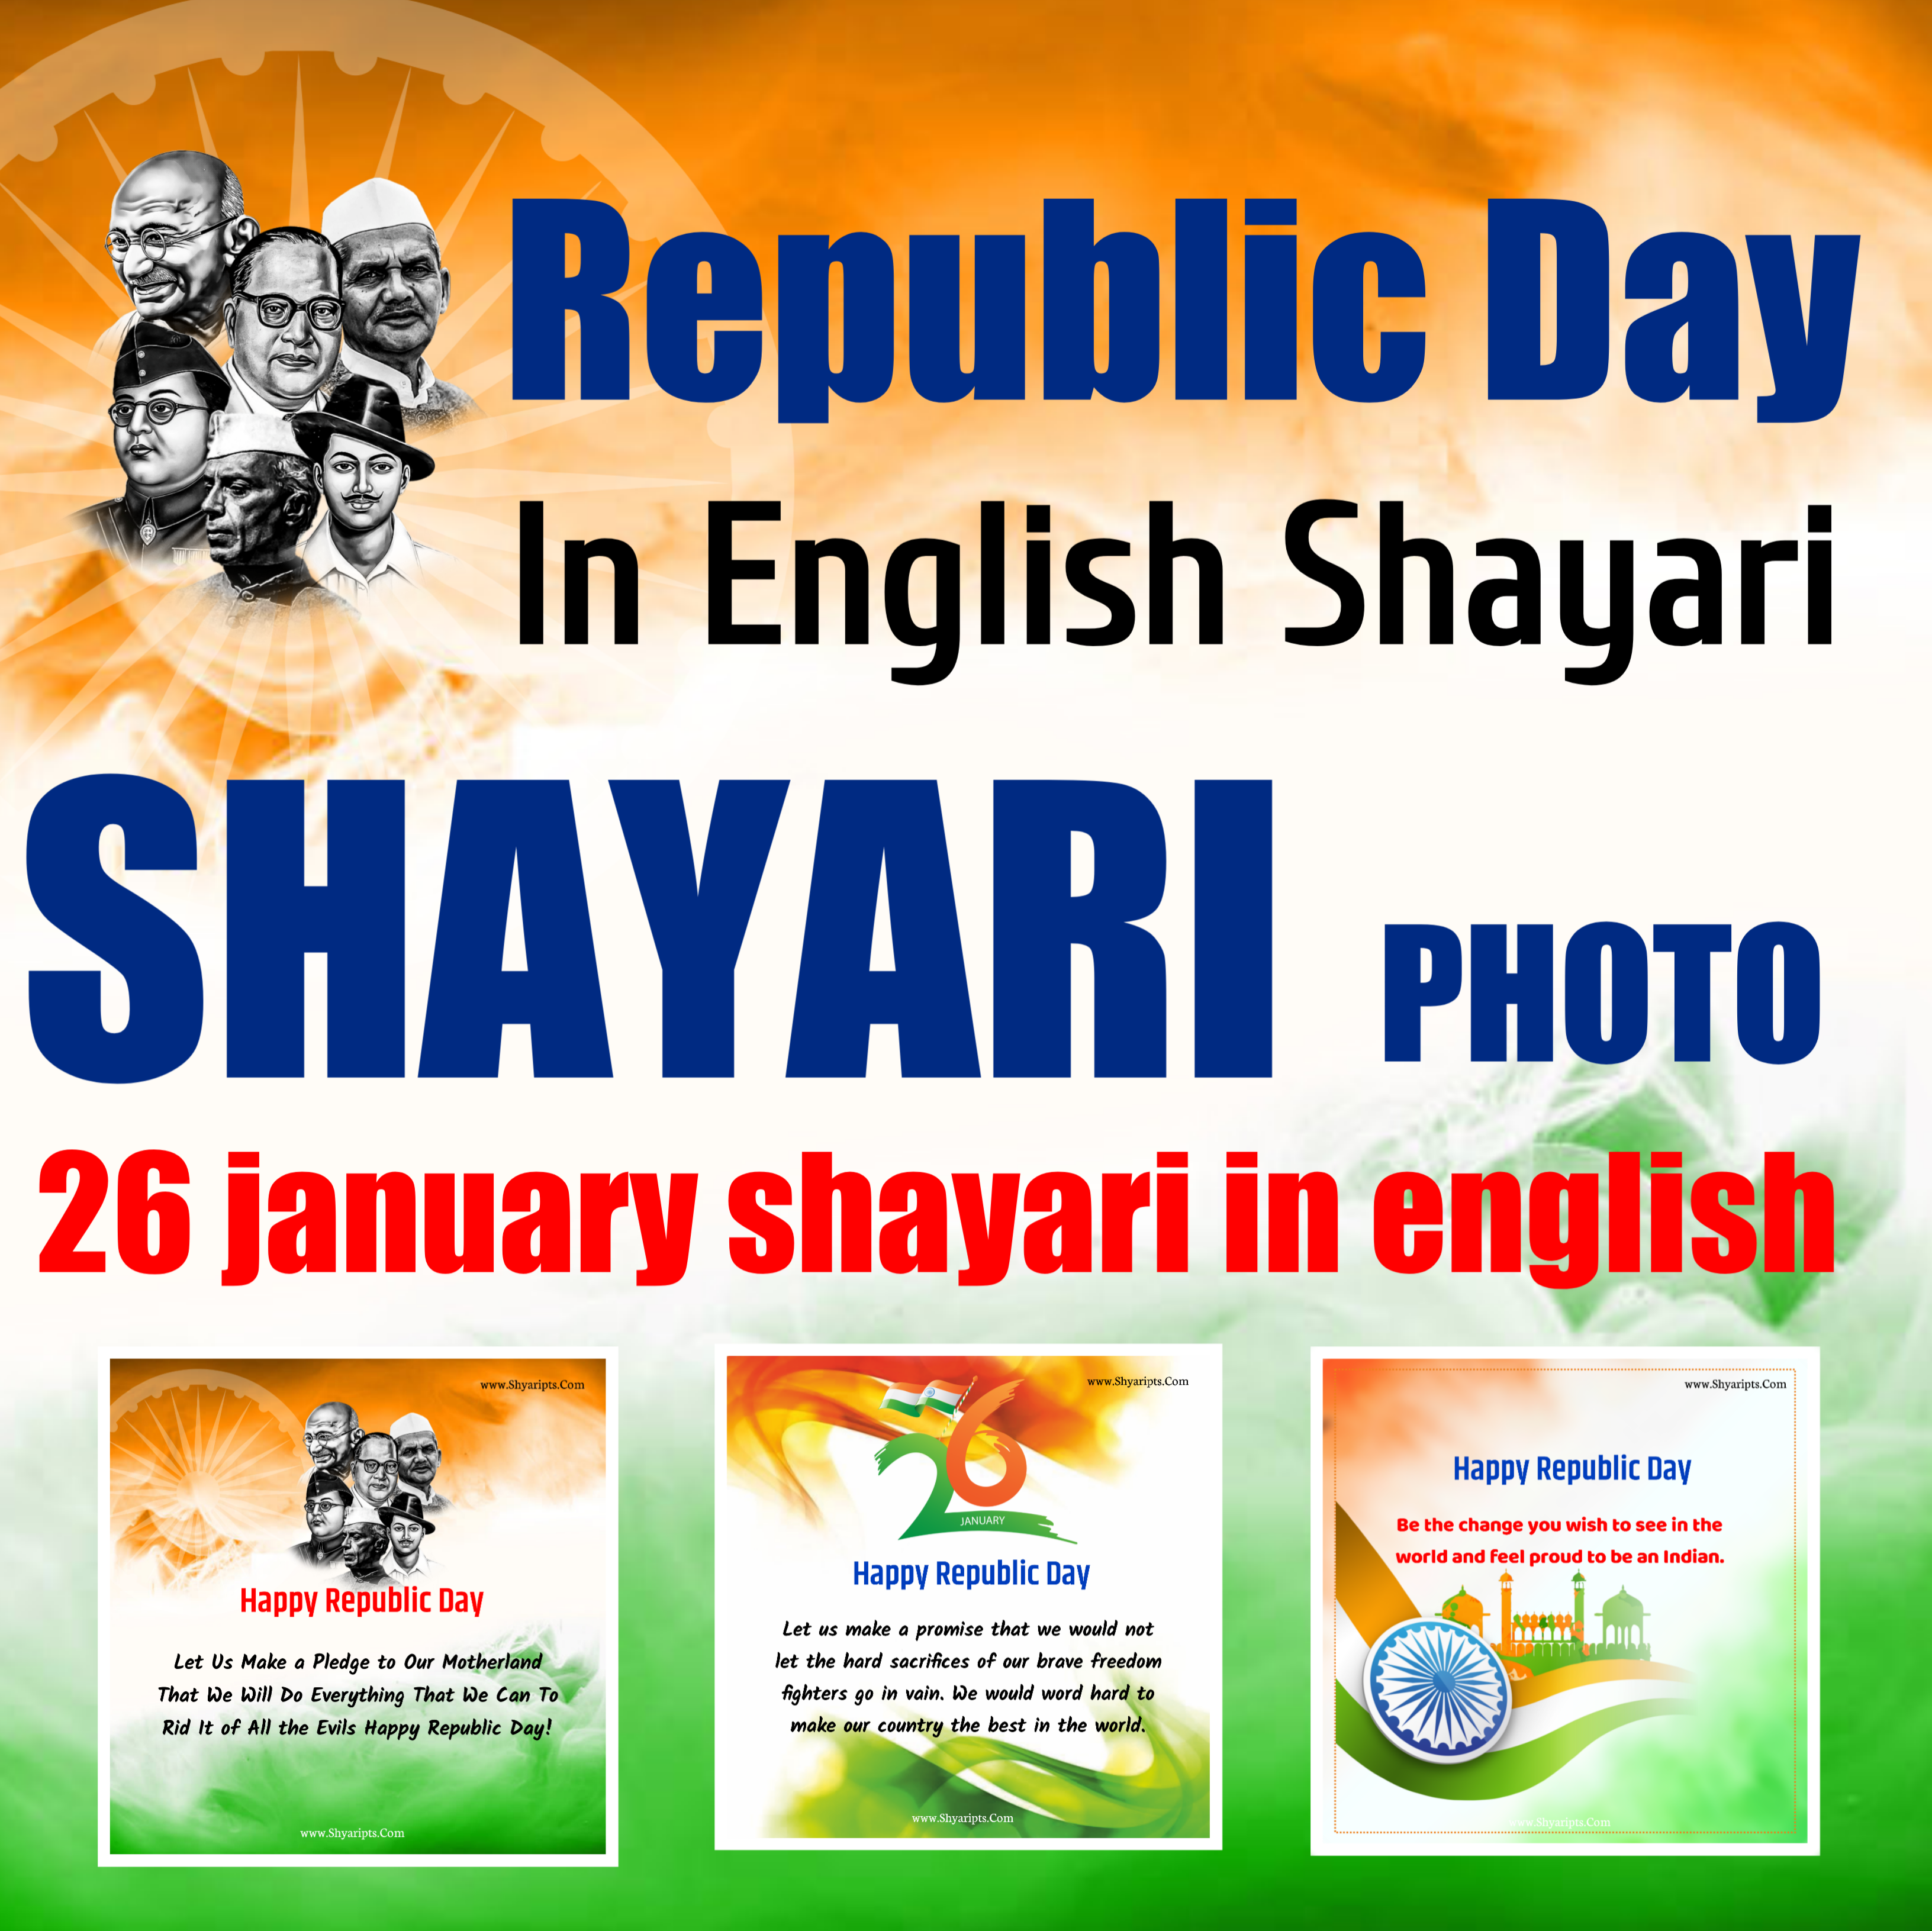 Happy republic day wishes quotes with images in English| 26 January Republic day sms,wishes shayari| ganatantrata quotes in English